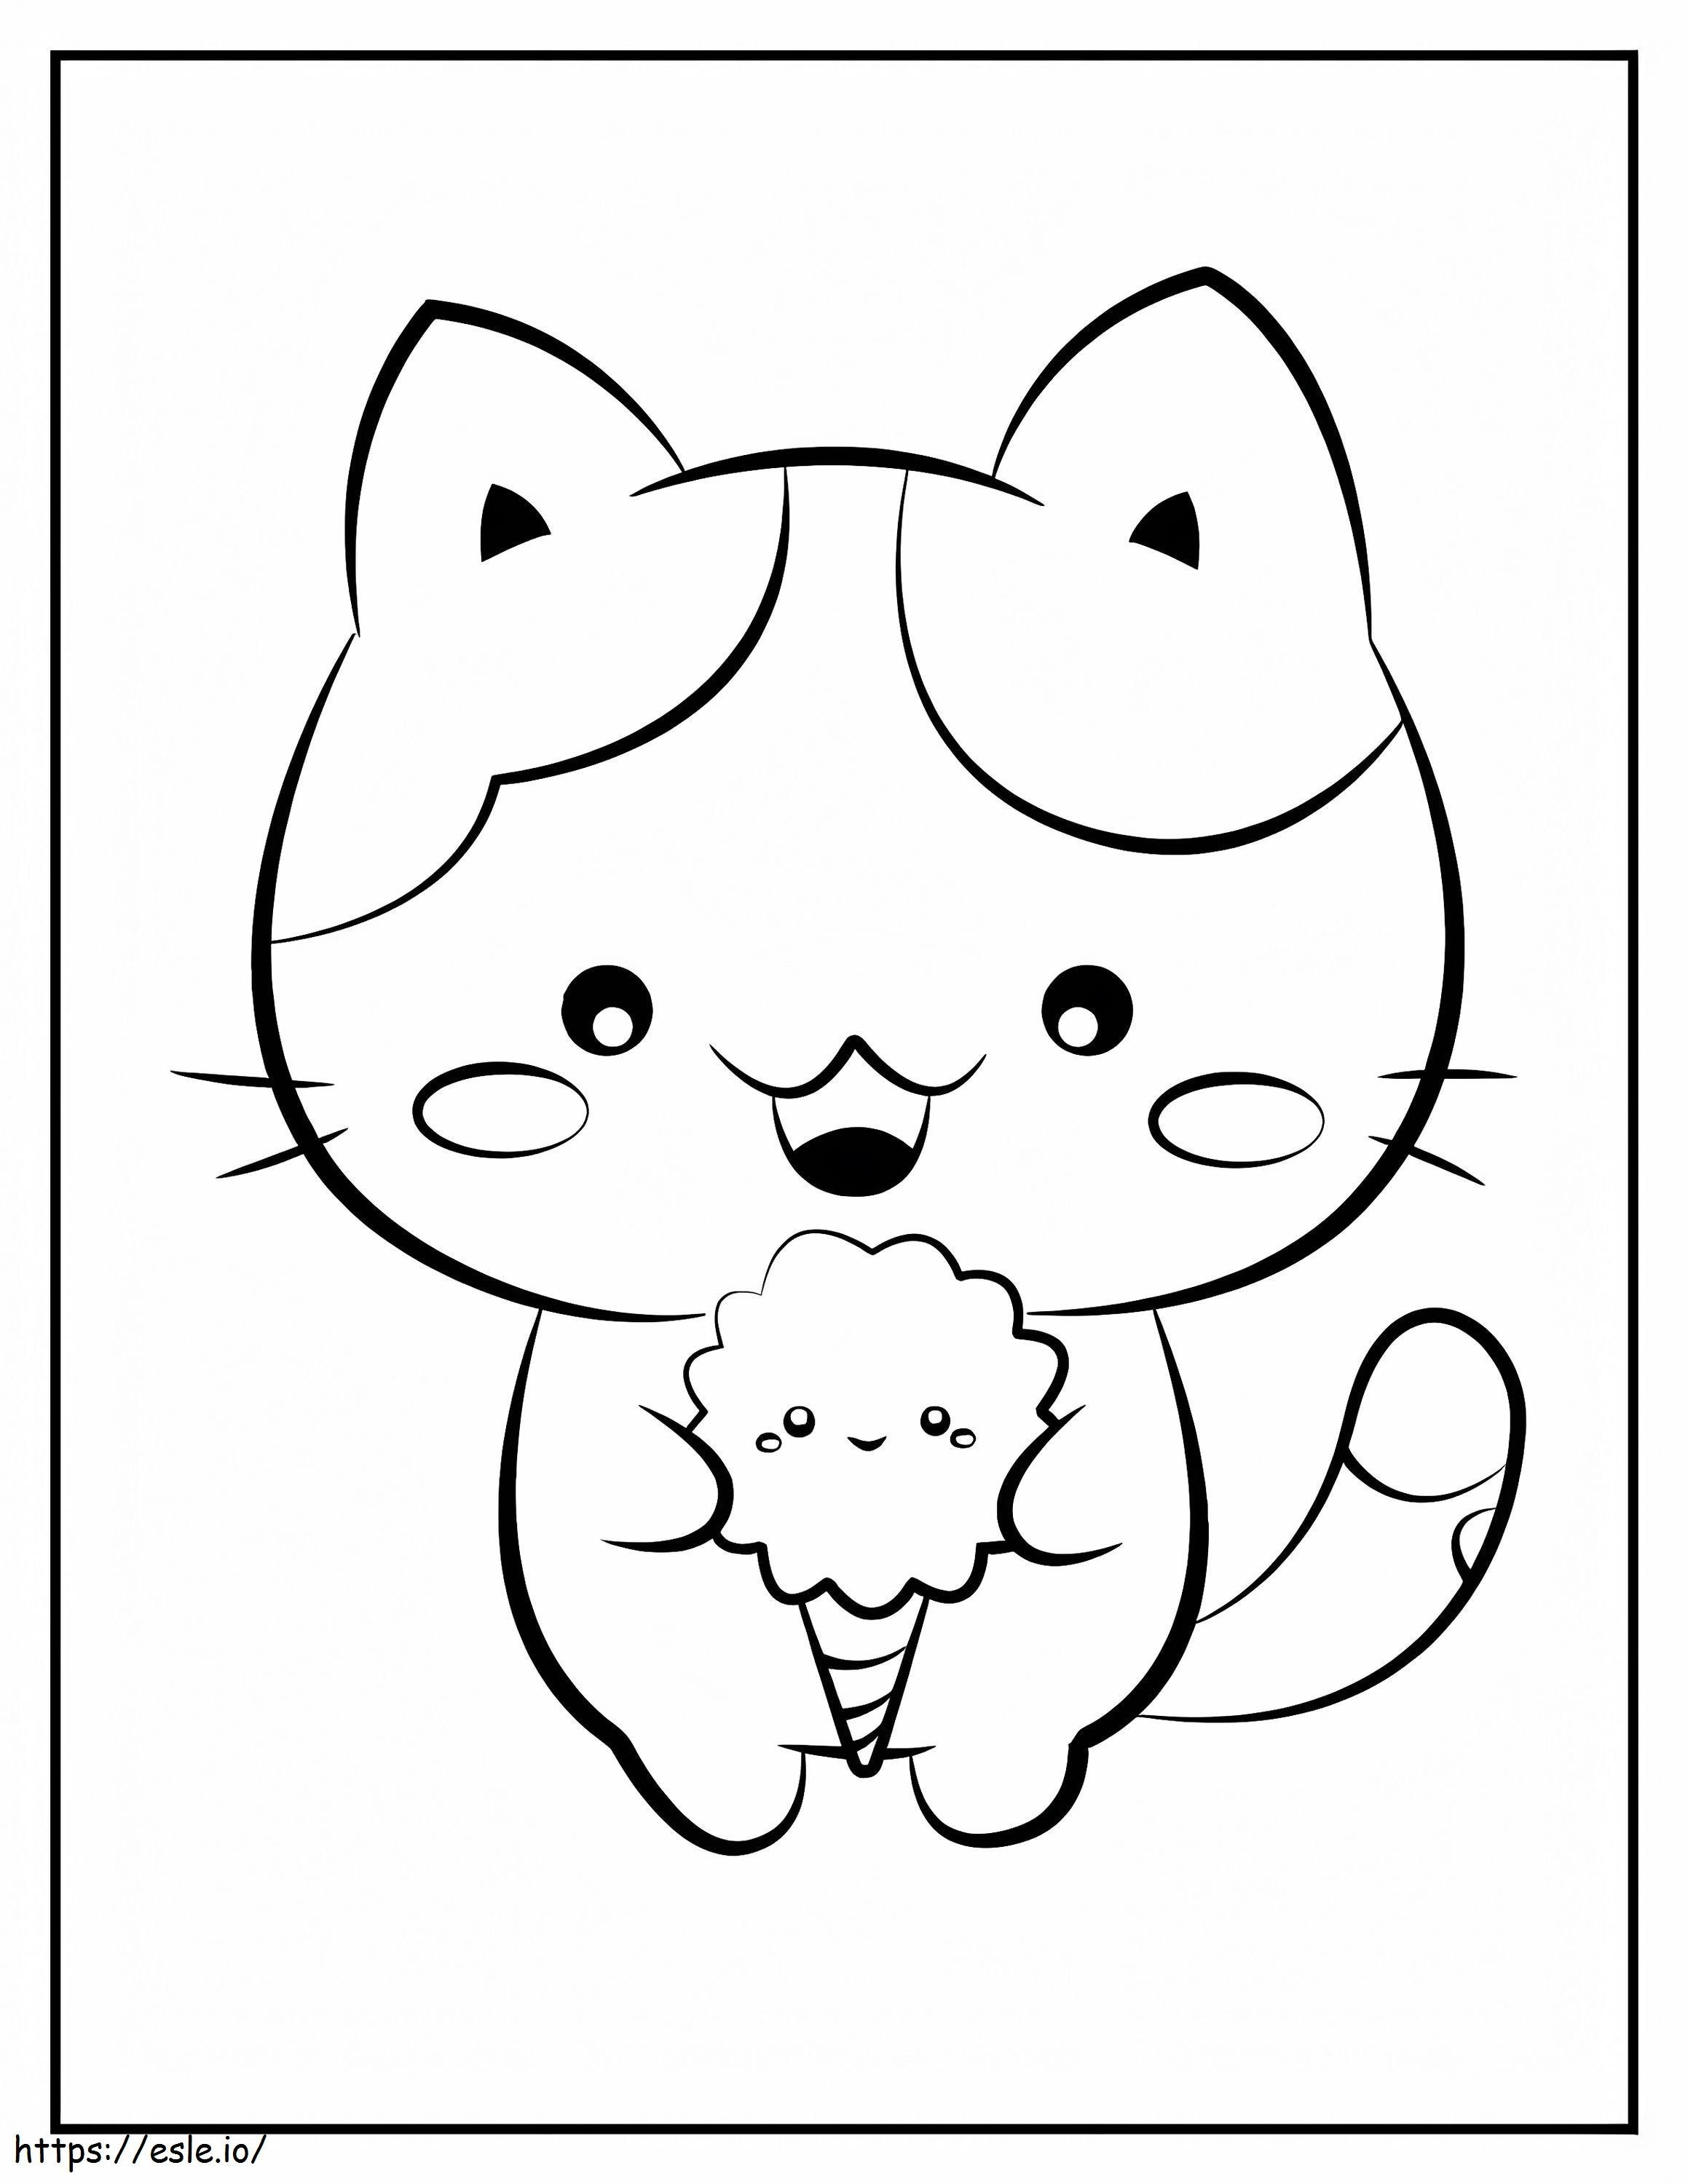 Kawaii Kitten Holding Ice Cream coloring page